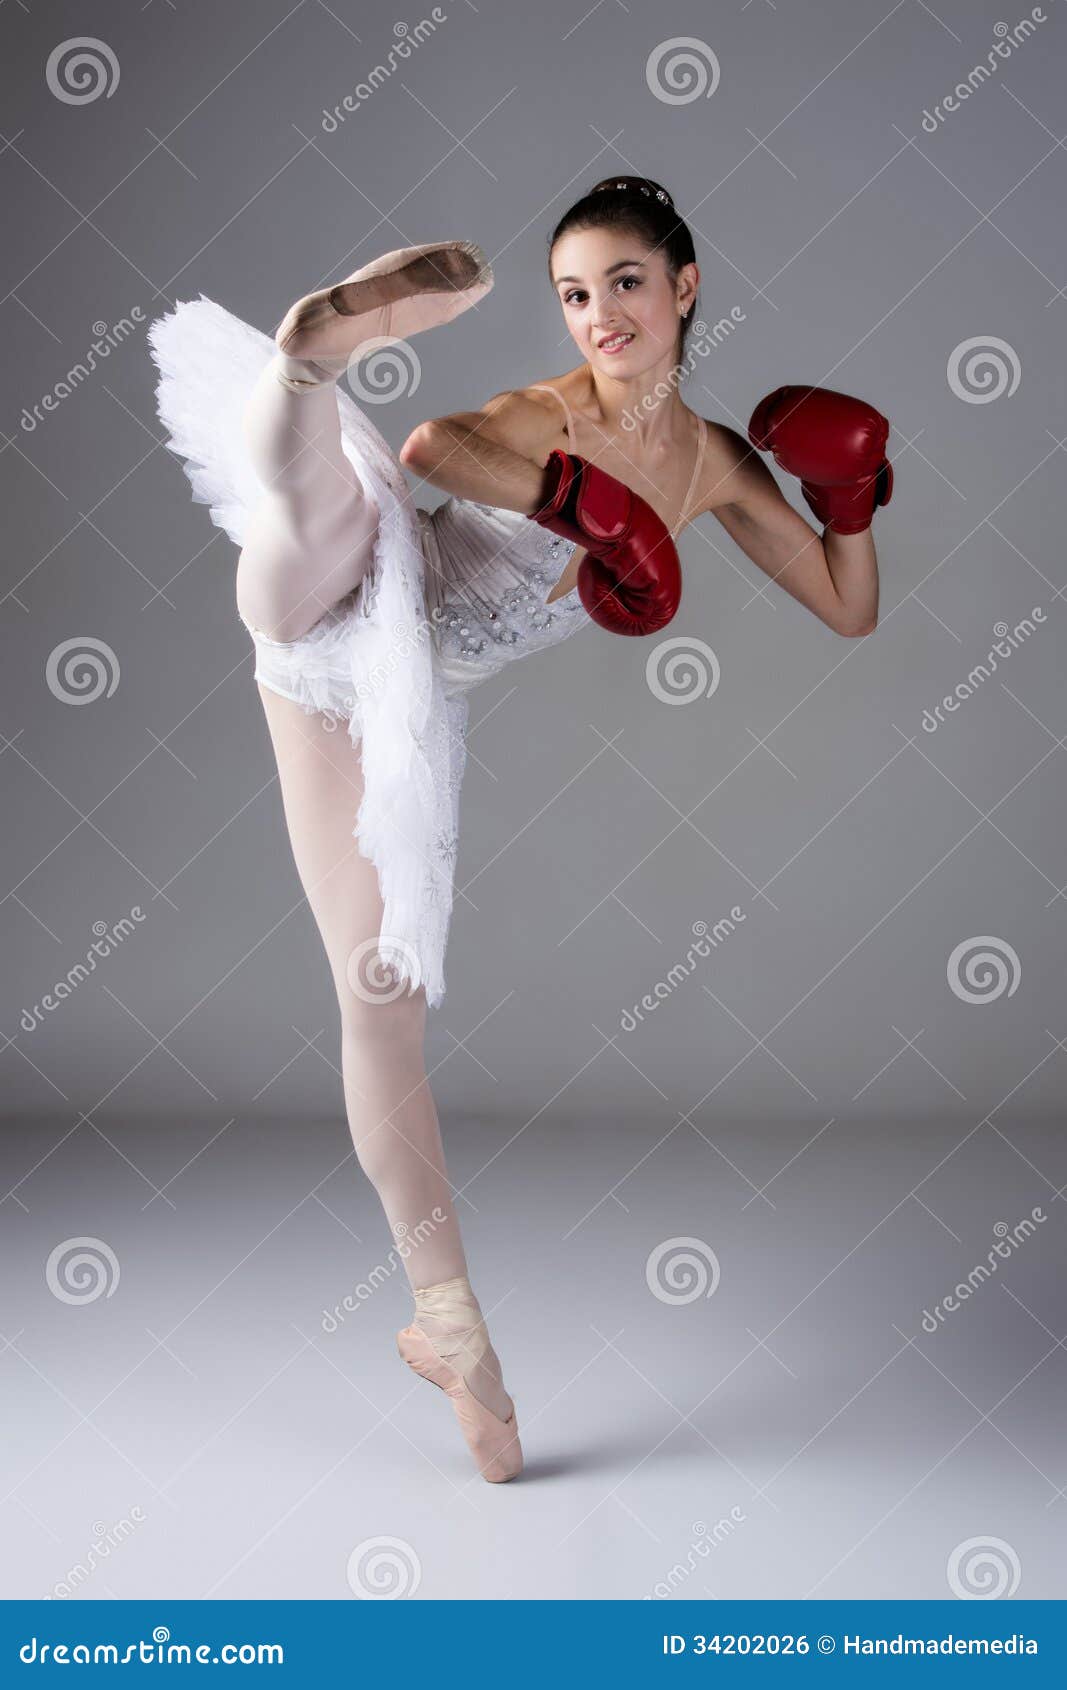 Female ballet dancer stock photo. Image of shoes, beauty - 34202026